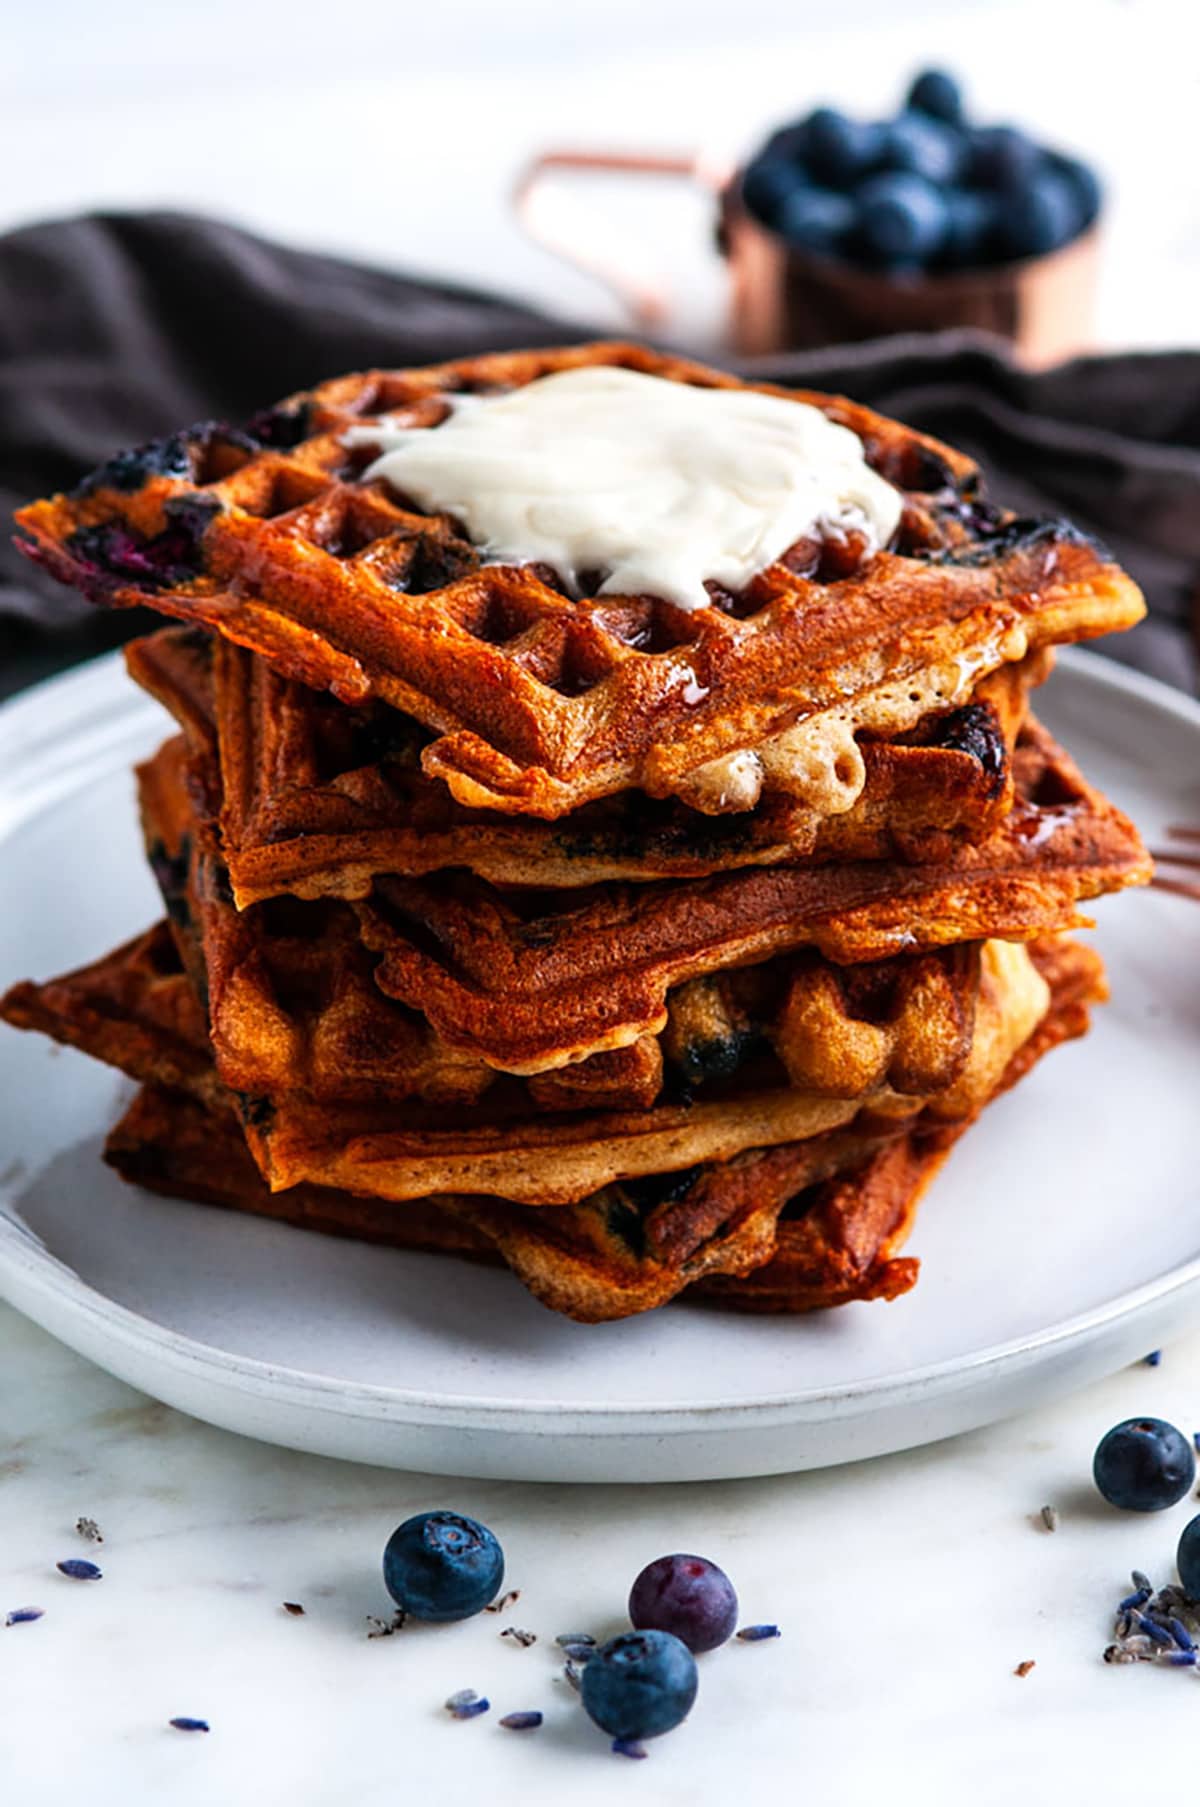 London Fog Blueberry Waffles with copper silverware and gray tea towel